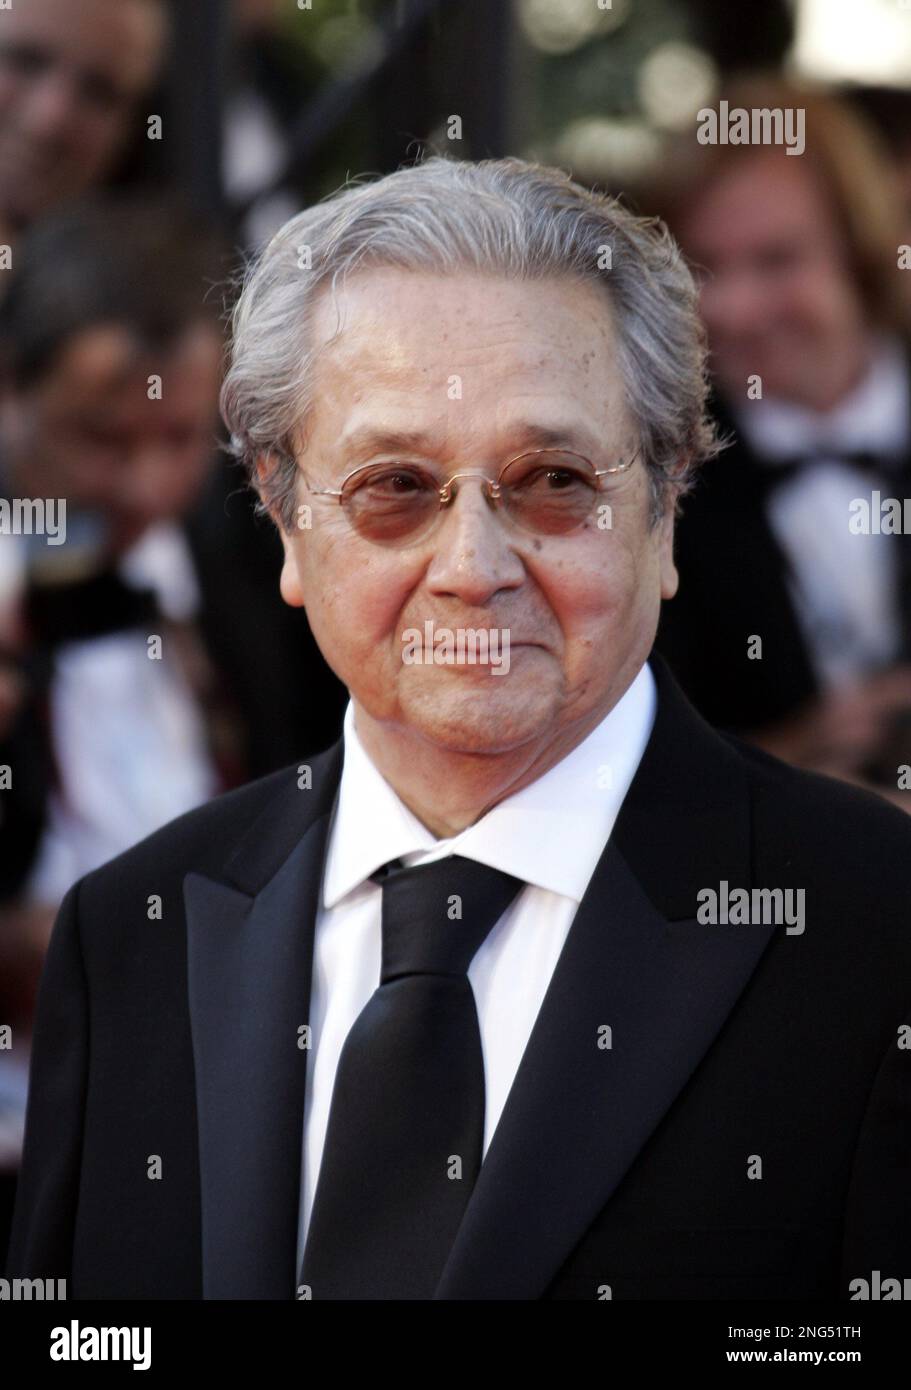 French lawyer Jacques Verges arrives for the screening of the film "Zodiac," at the 60th International film festival in Cannes, southern France, on Thursday, May 17, 2007. (AP Photo/Francois Mori) Stock Photo